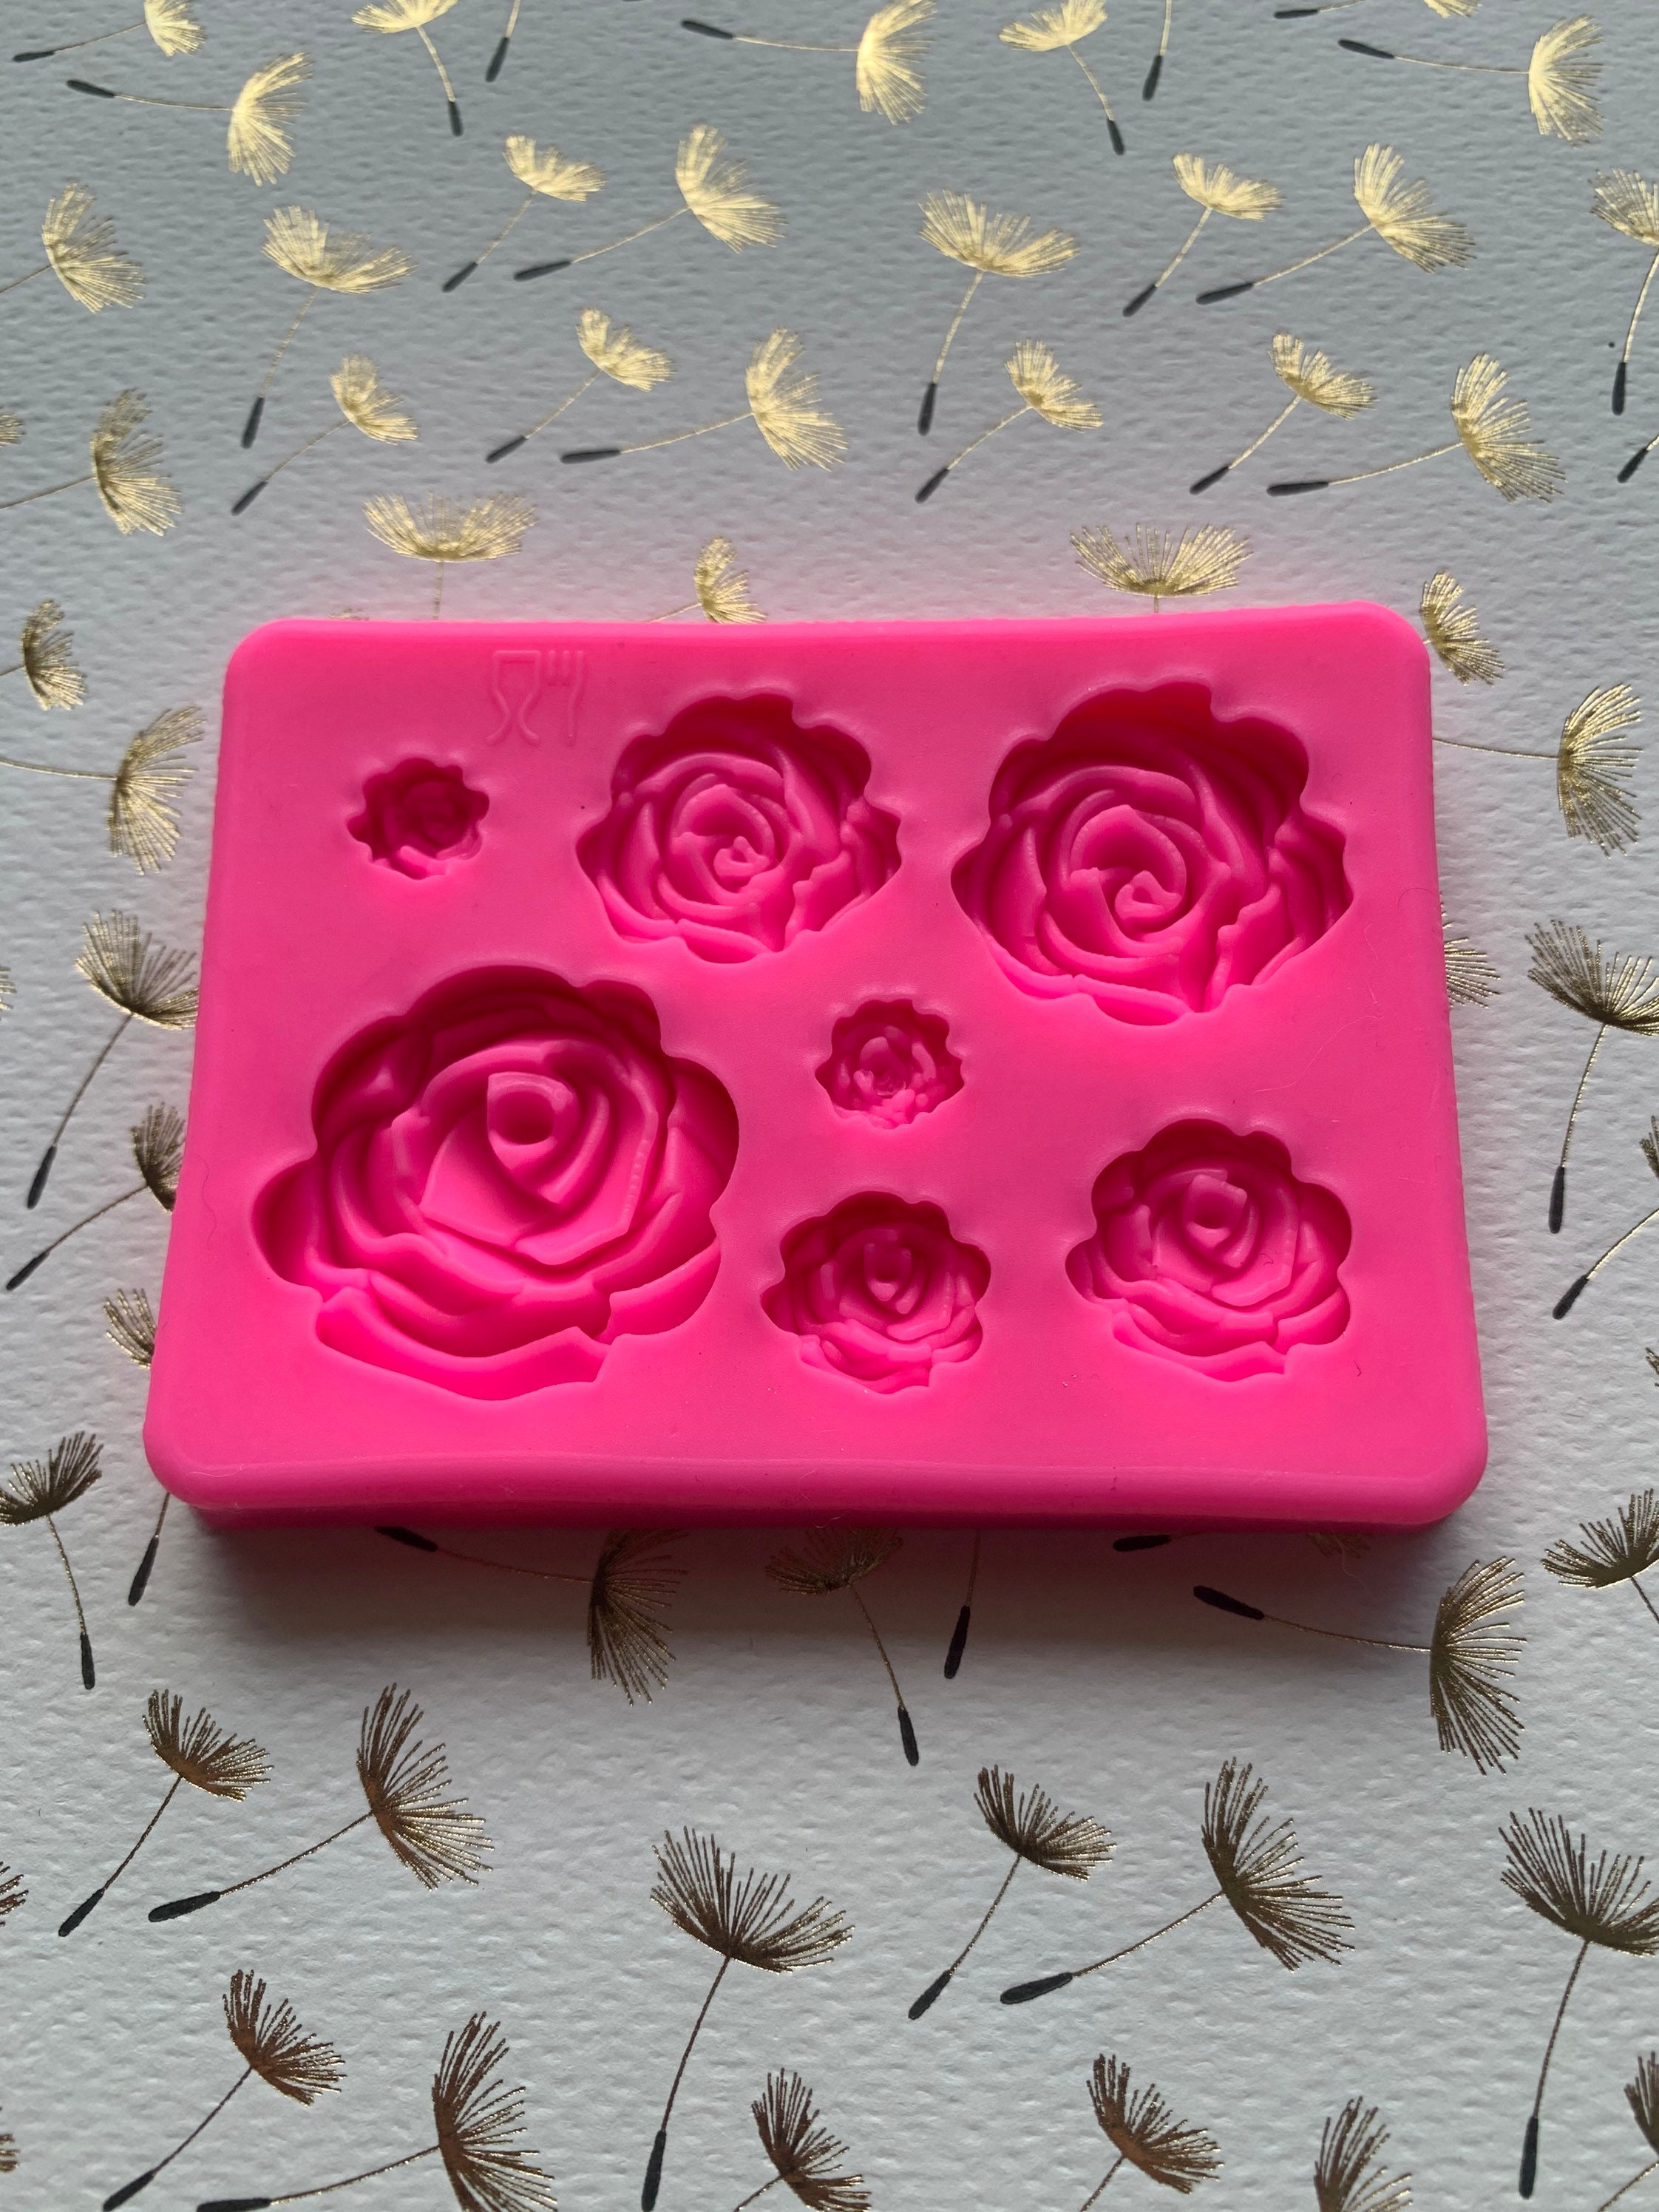 Beautiful Rose Silicone Mold-Rose Flower Resin Mold-Silicone Rose  Mold-Jewelry Charm Mold-Epoxy Resin Art Mold-Gift for Her